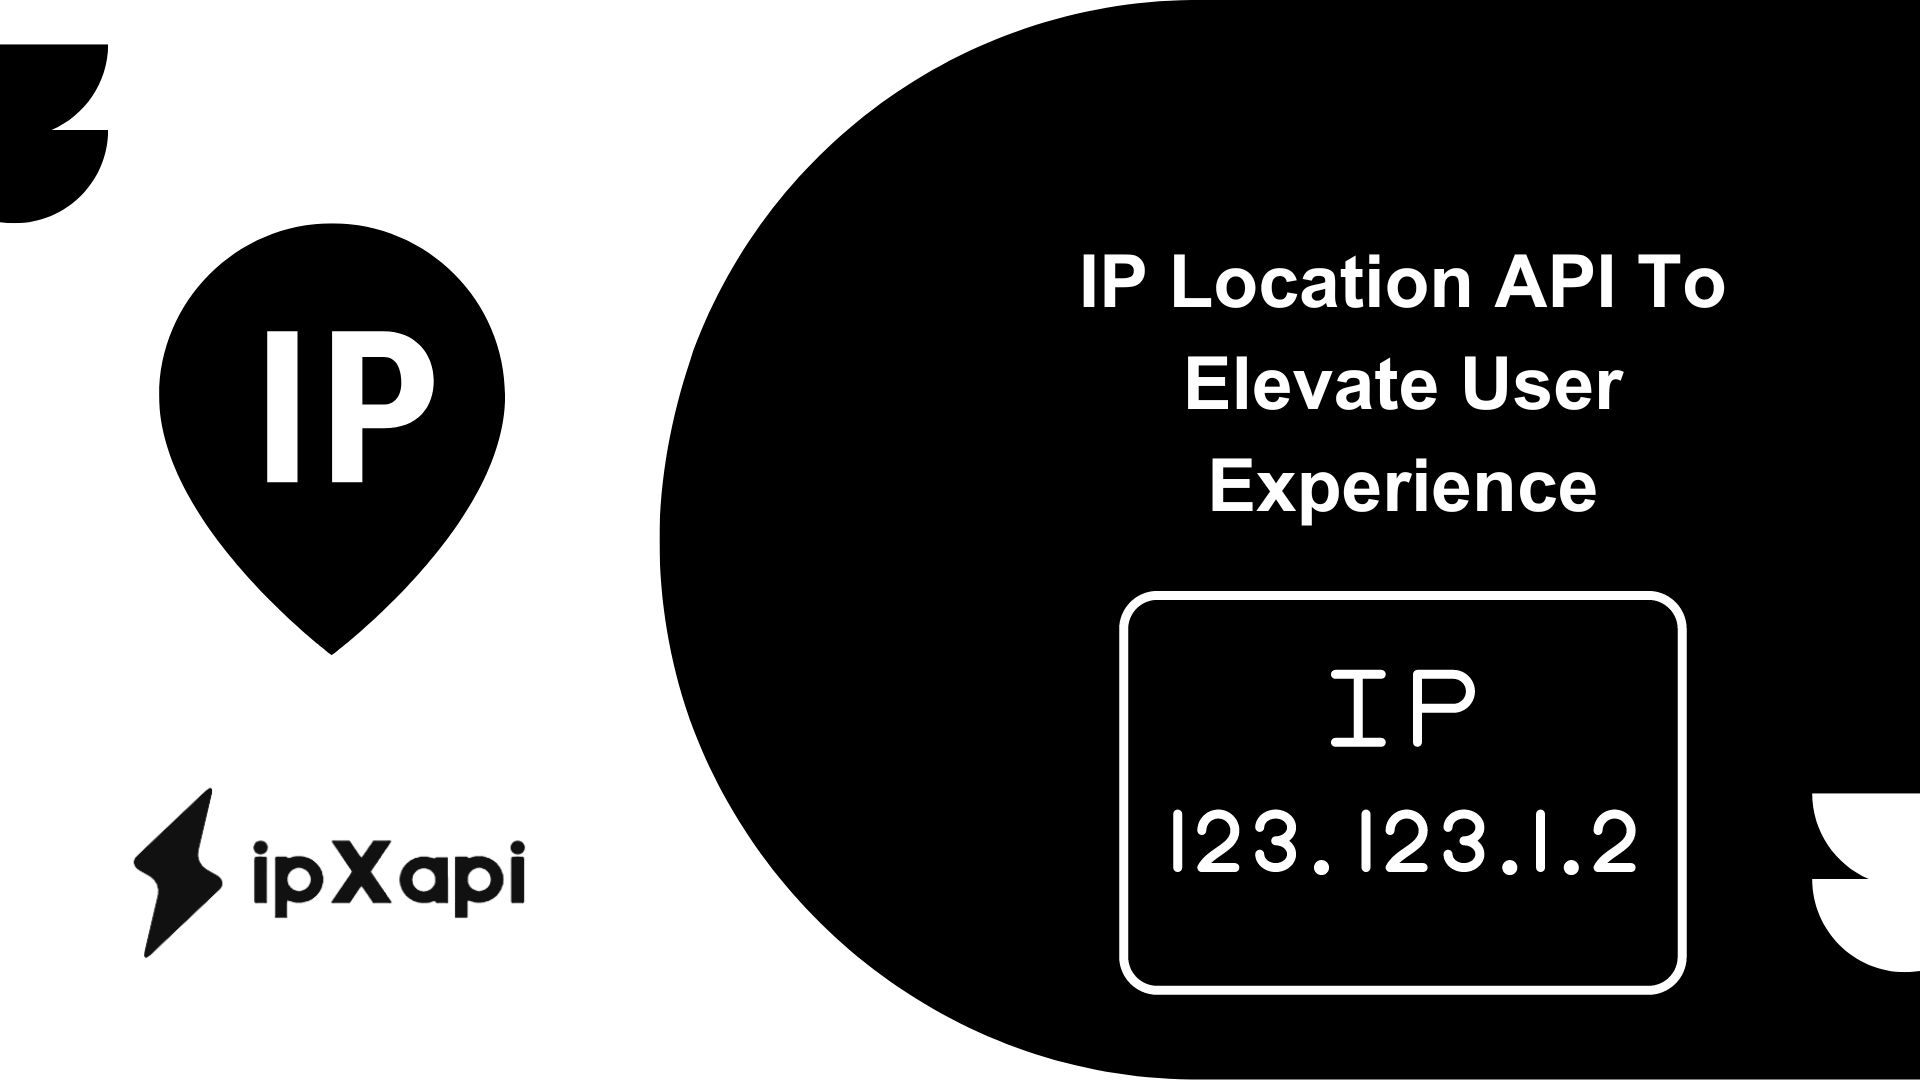 IP Location API To Elevate User Experience